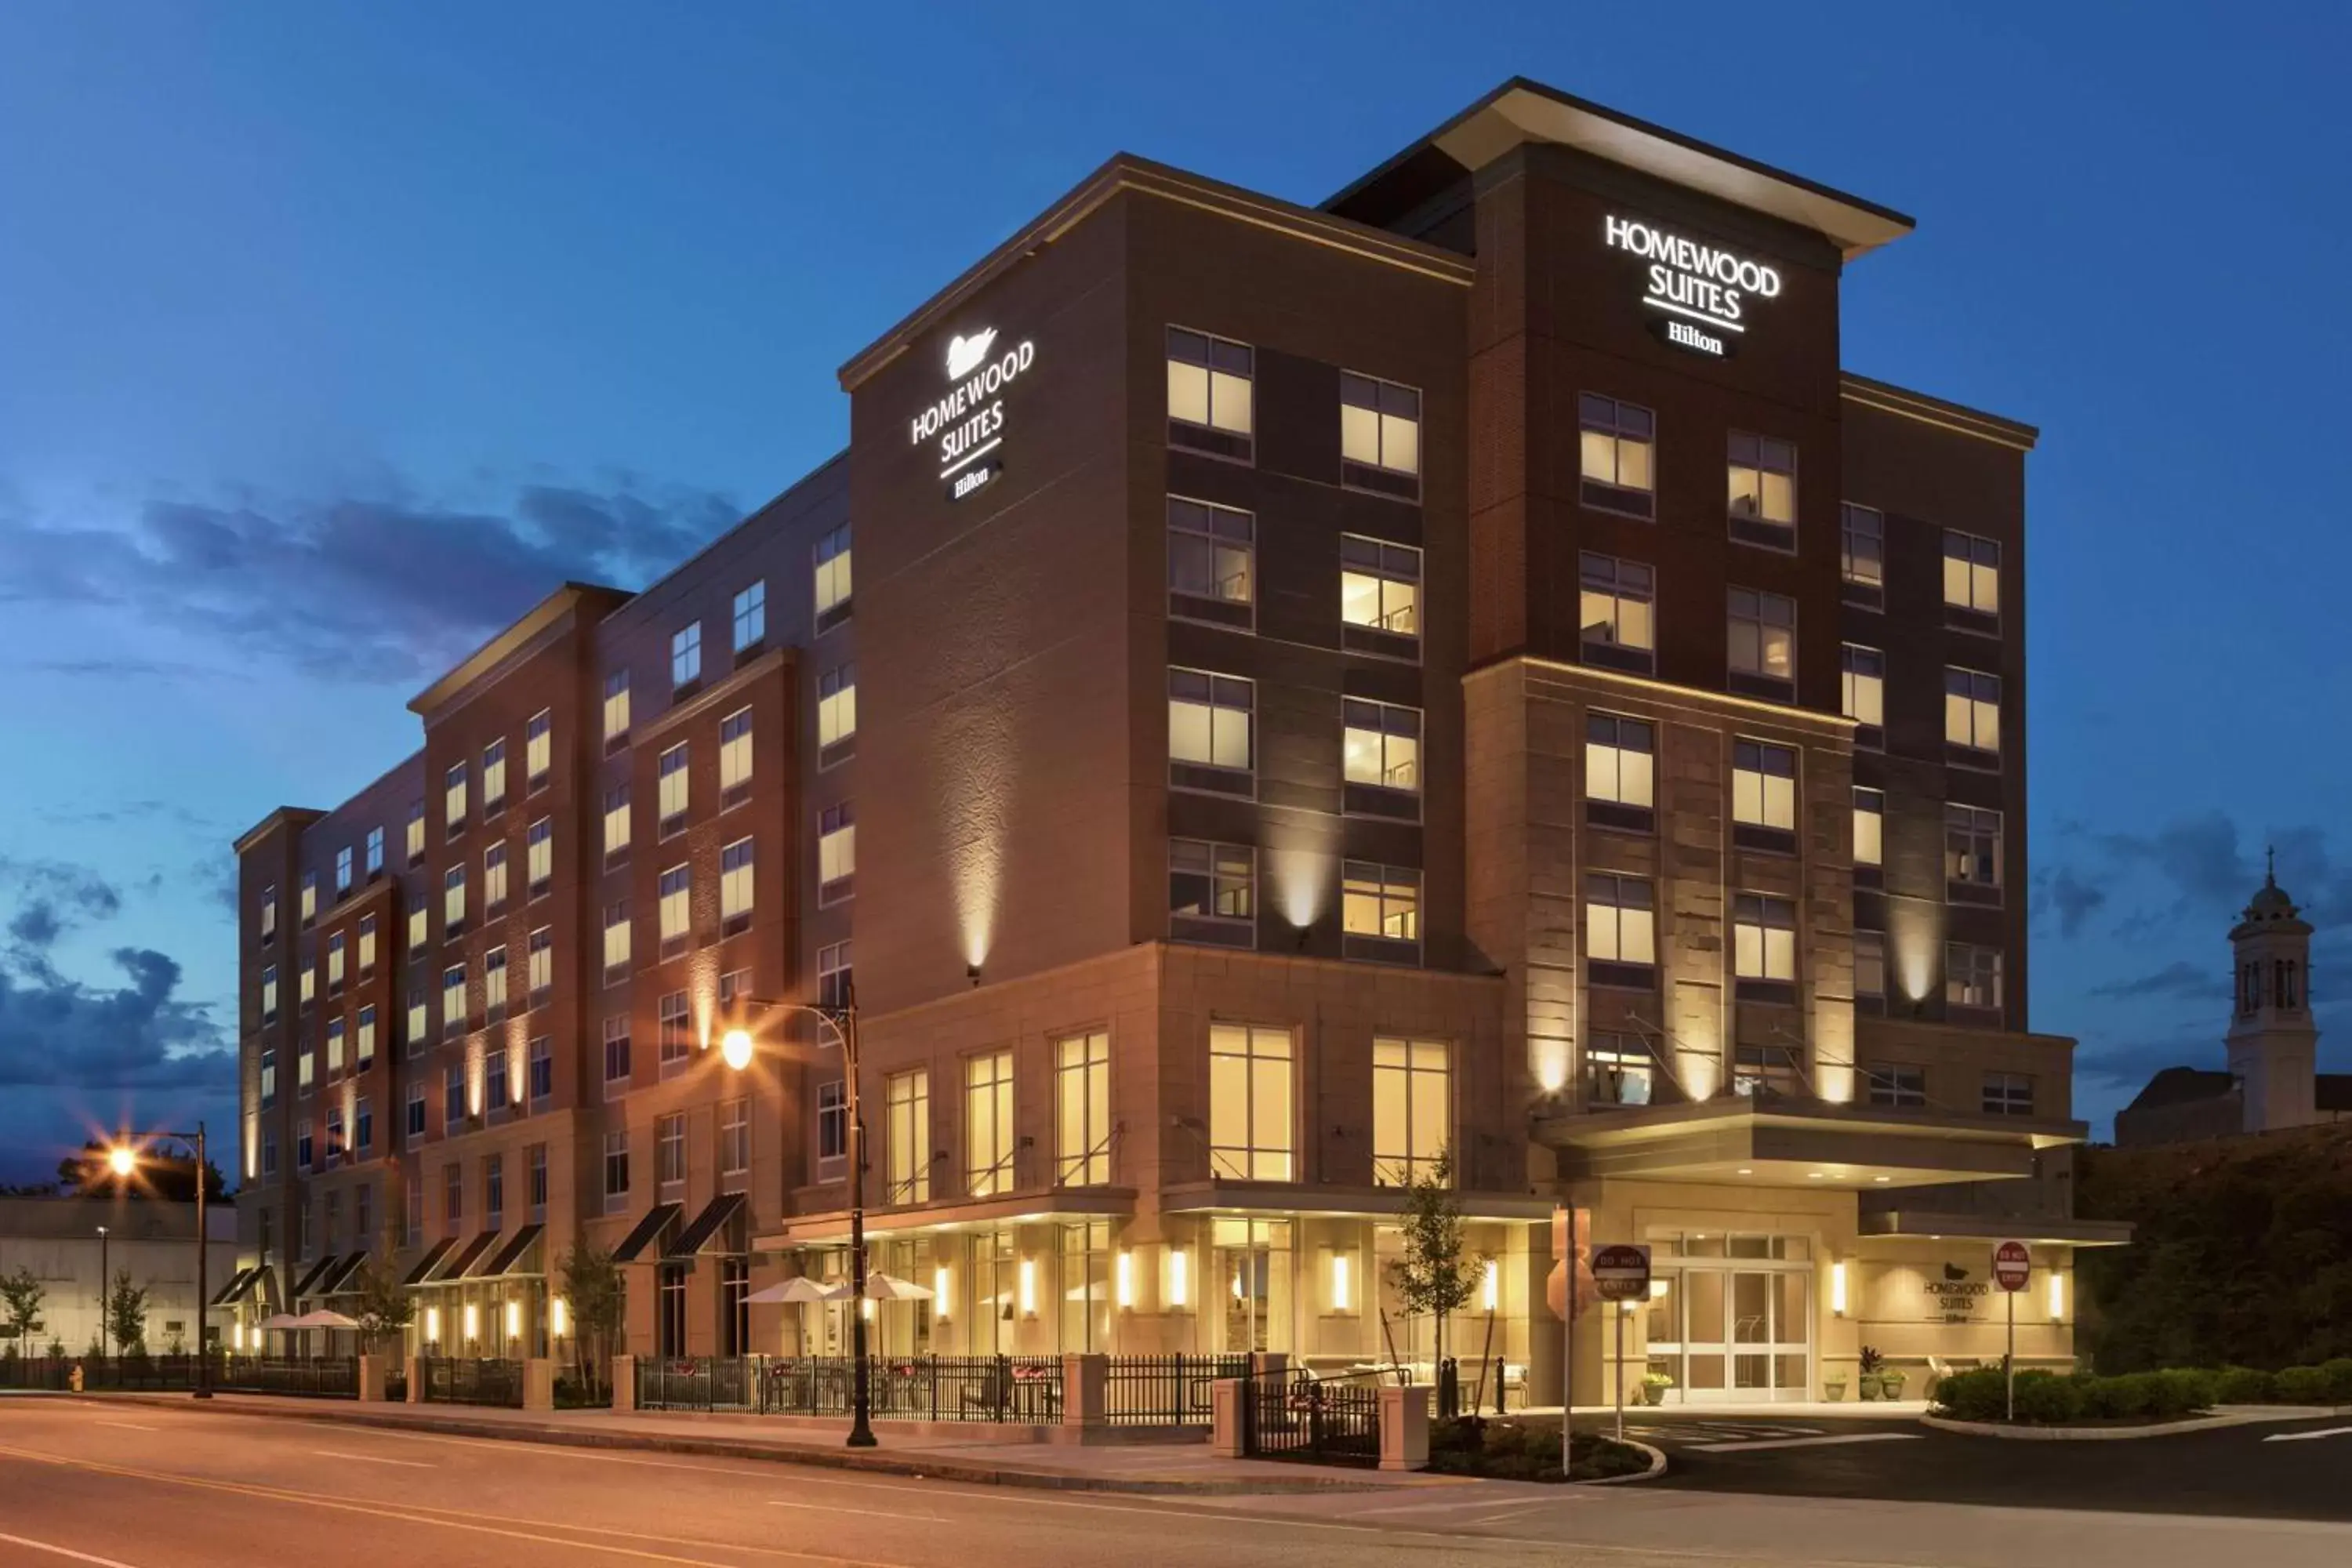 Property Building in Homewood Suites By Hilton Worcester